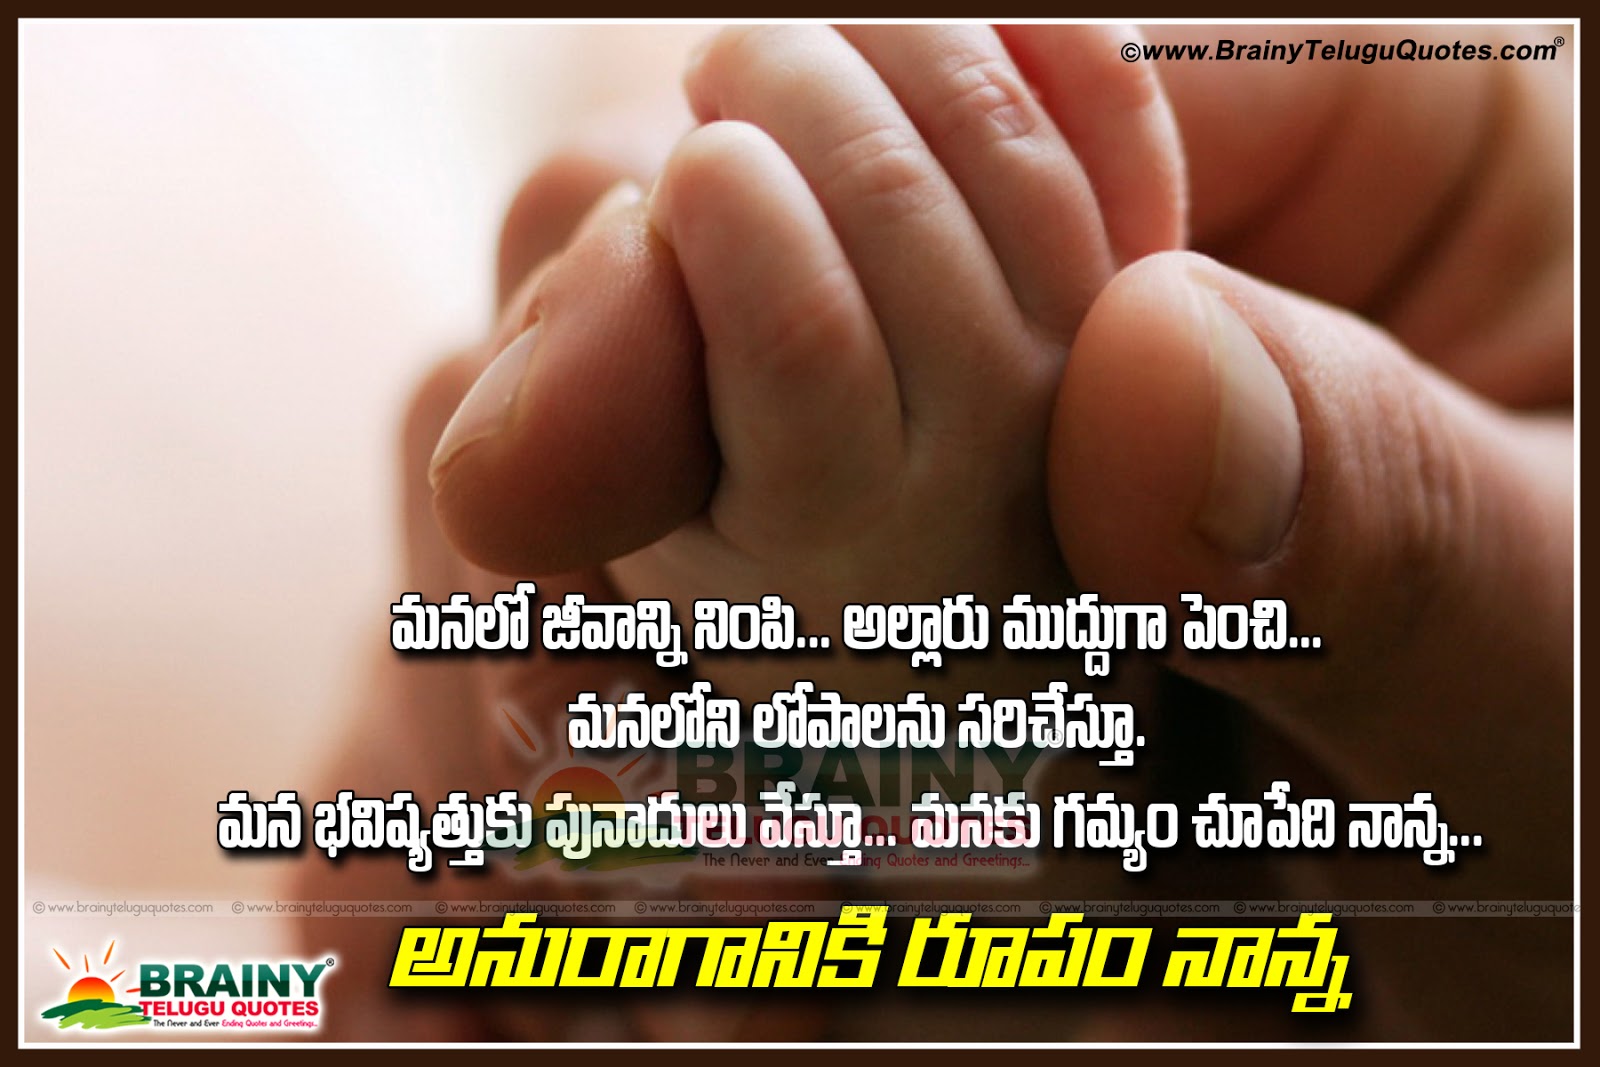 in Telugu Language father Quotes and Nice online Beautiful father Quotations online New Telugu Nanna Kavithau I Love You Daddy